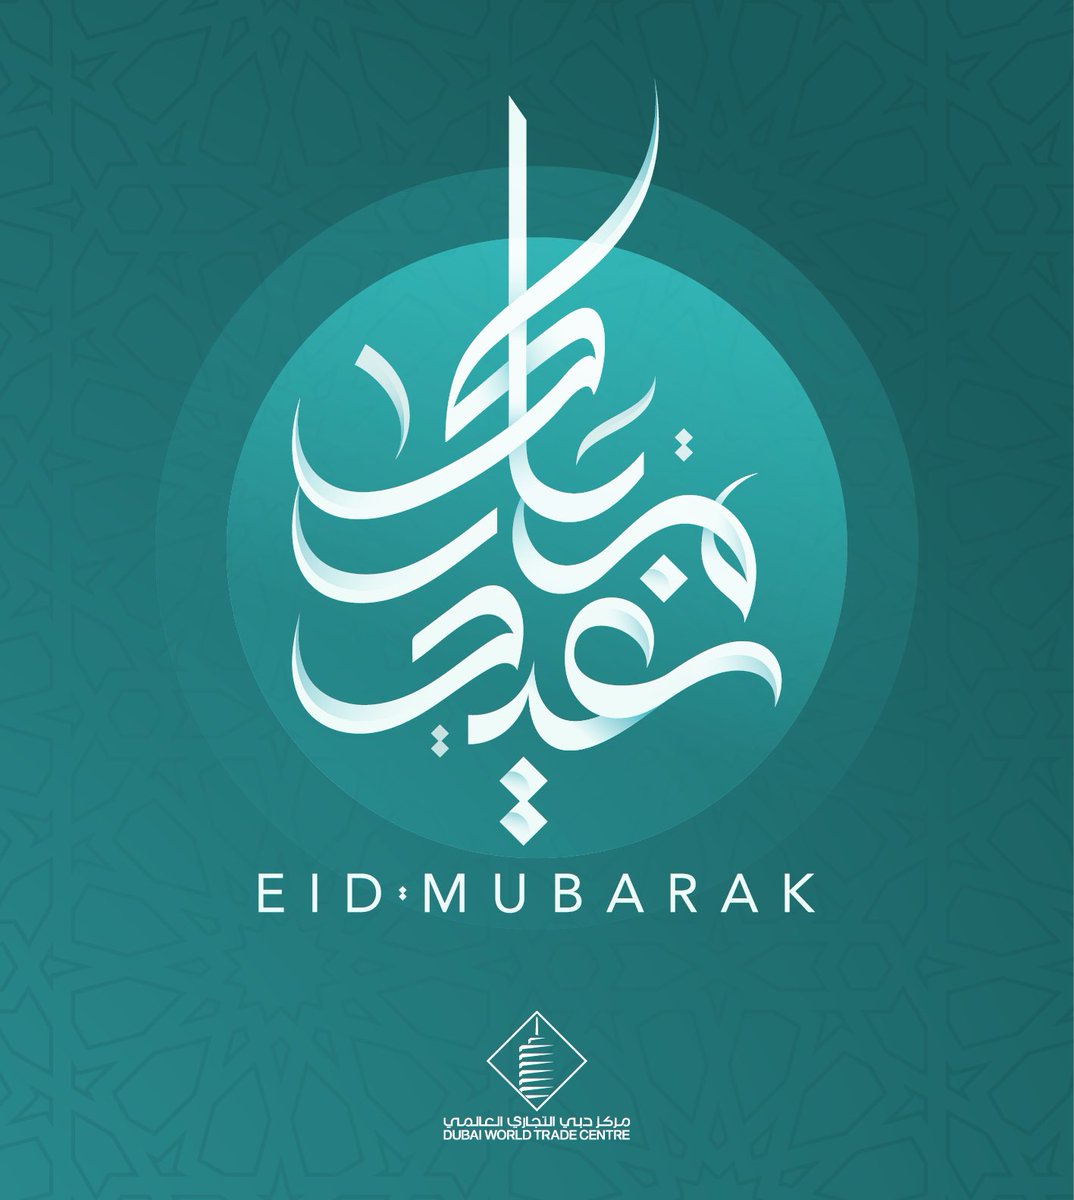 #EidMubarak from #DubaiWorldTradeCentre! May this Eid bring you and your loved ones joy, prosperity, and peace.